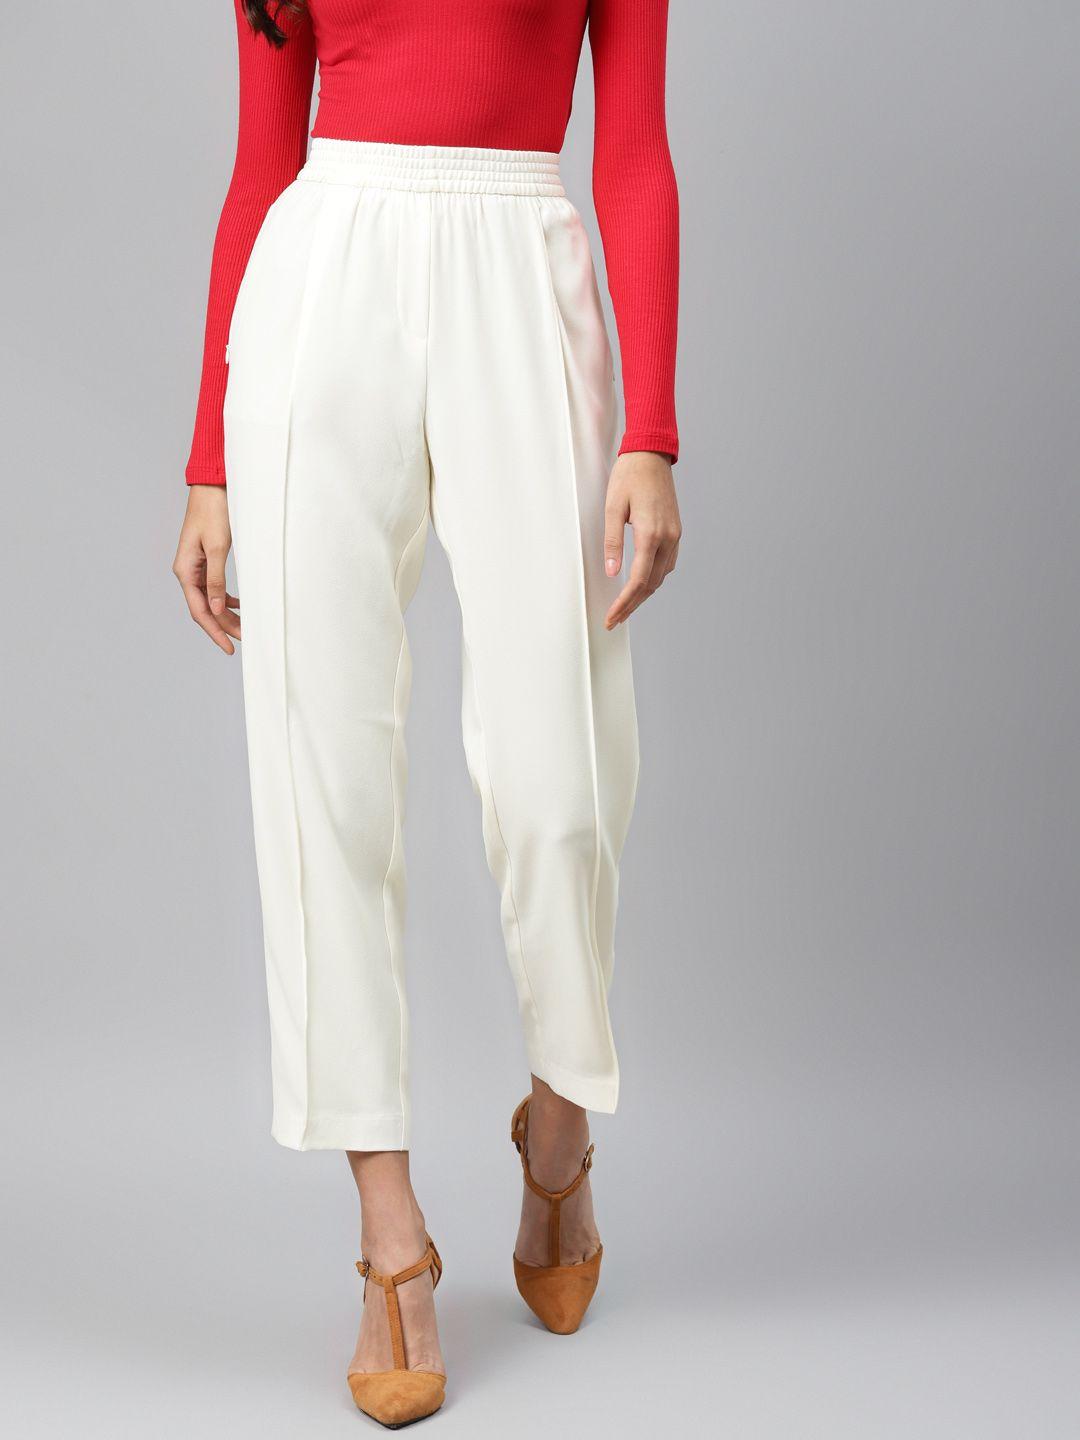 marks-&-spencer-women-off-white-tapered-fit-solid-crop-darted-trousers